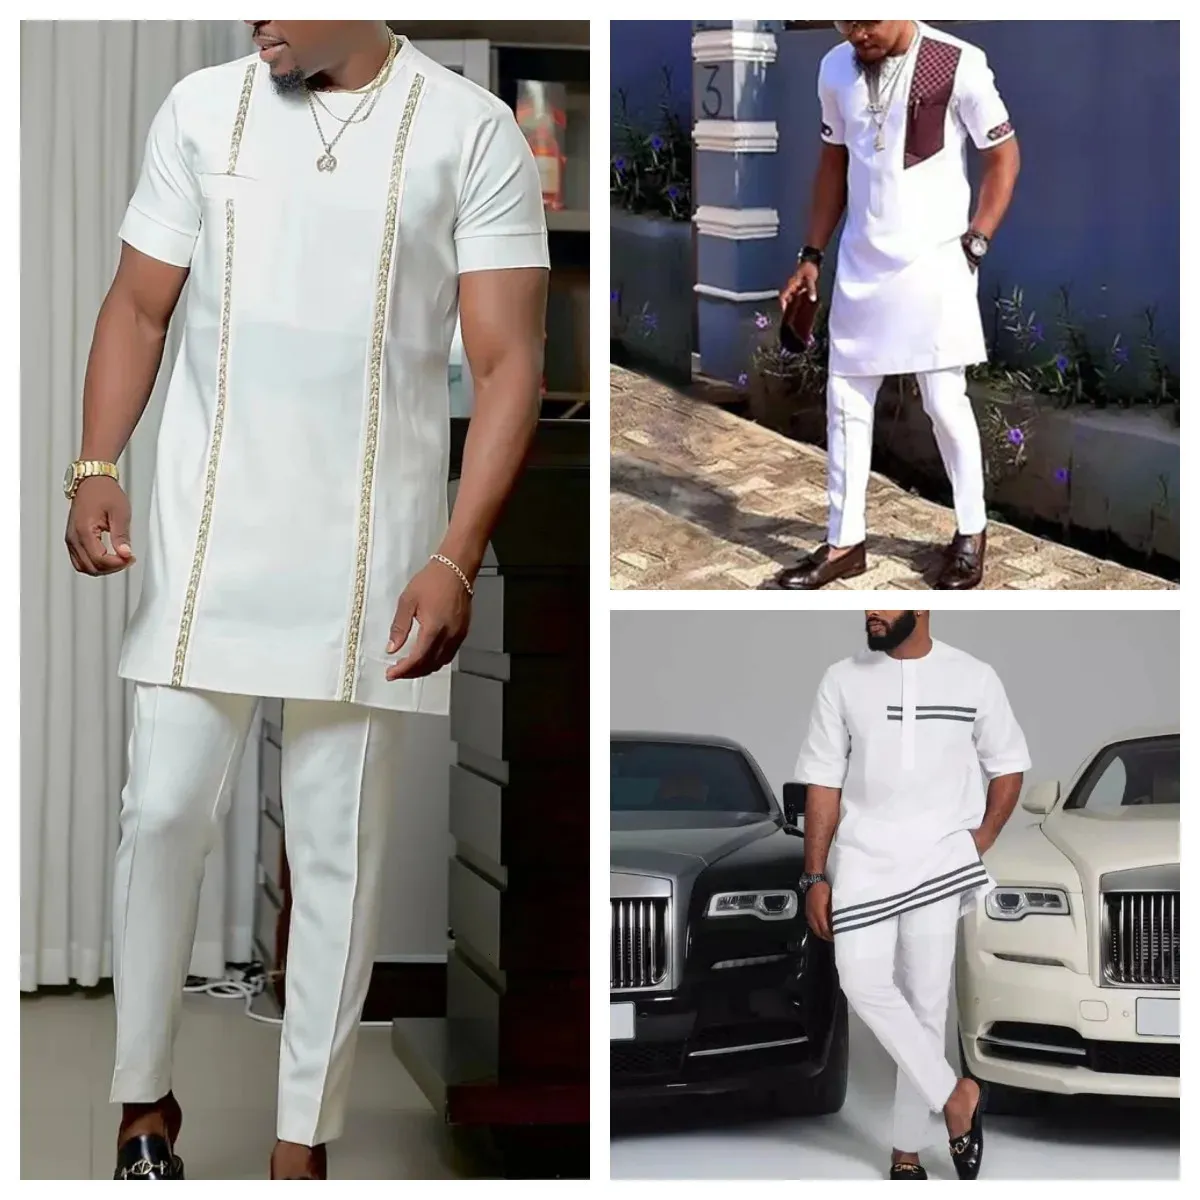 Kaftan Mens TwoPiece Suit Male Sets Round Neck Short Sleeve Ethnic Tops Shirt Trousers Comfortable Clothing Wedding Outfits 240409